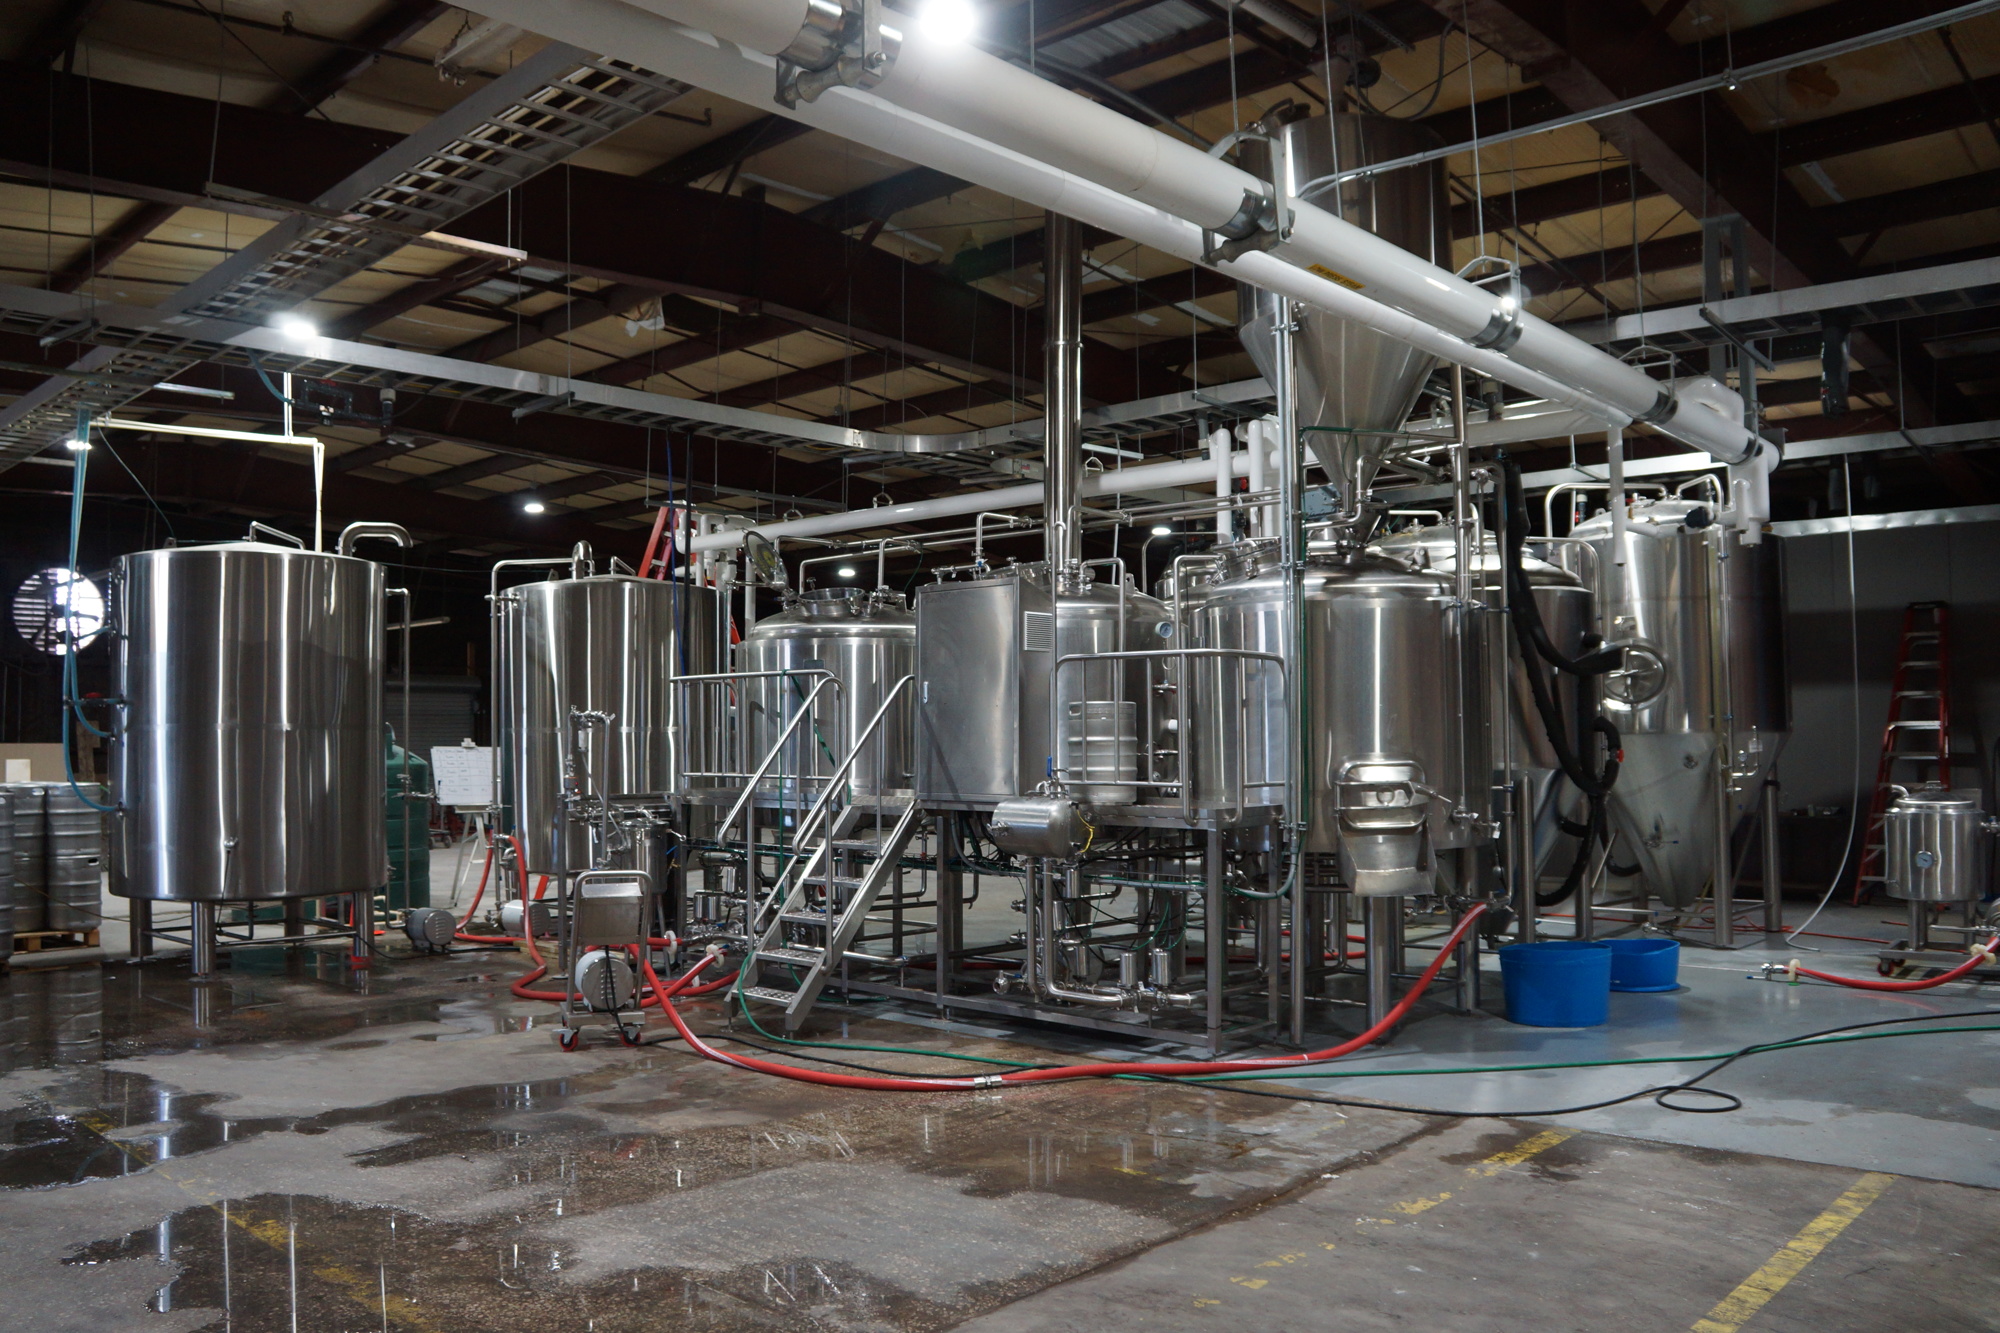 The brewery machinery takes up 10,000 square feet of the building.